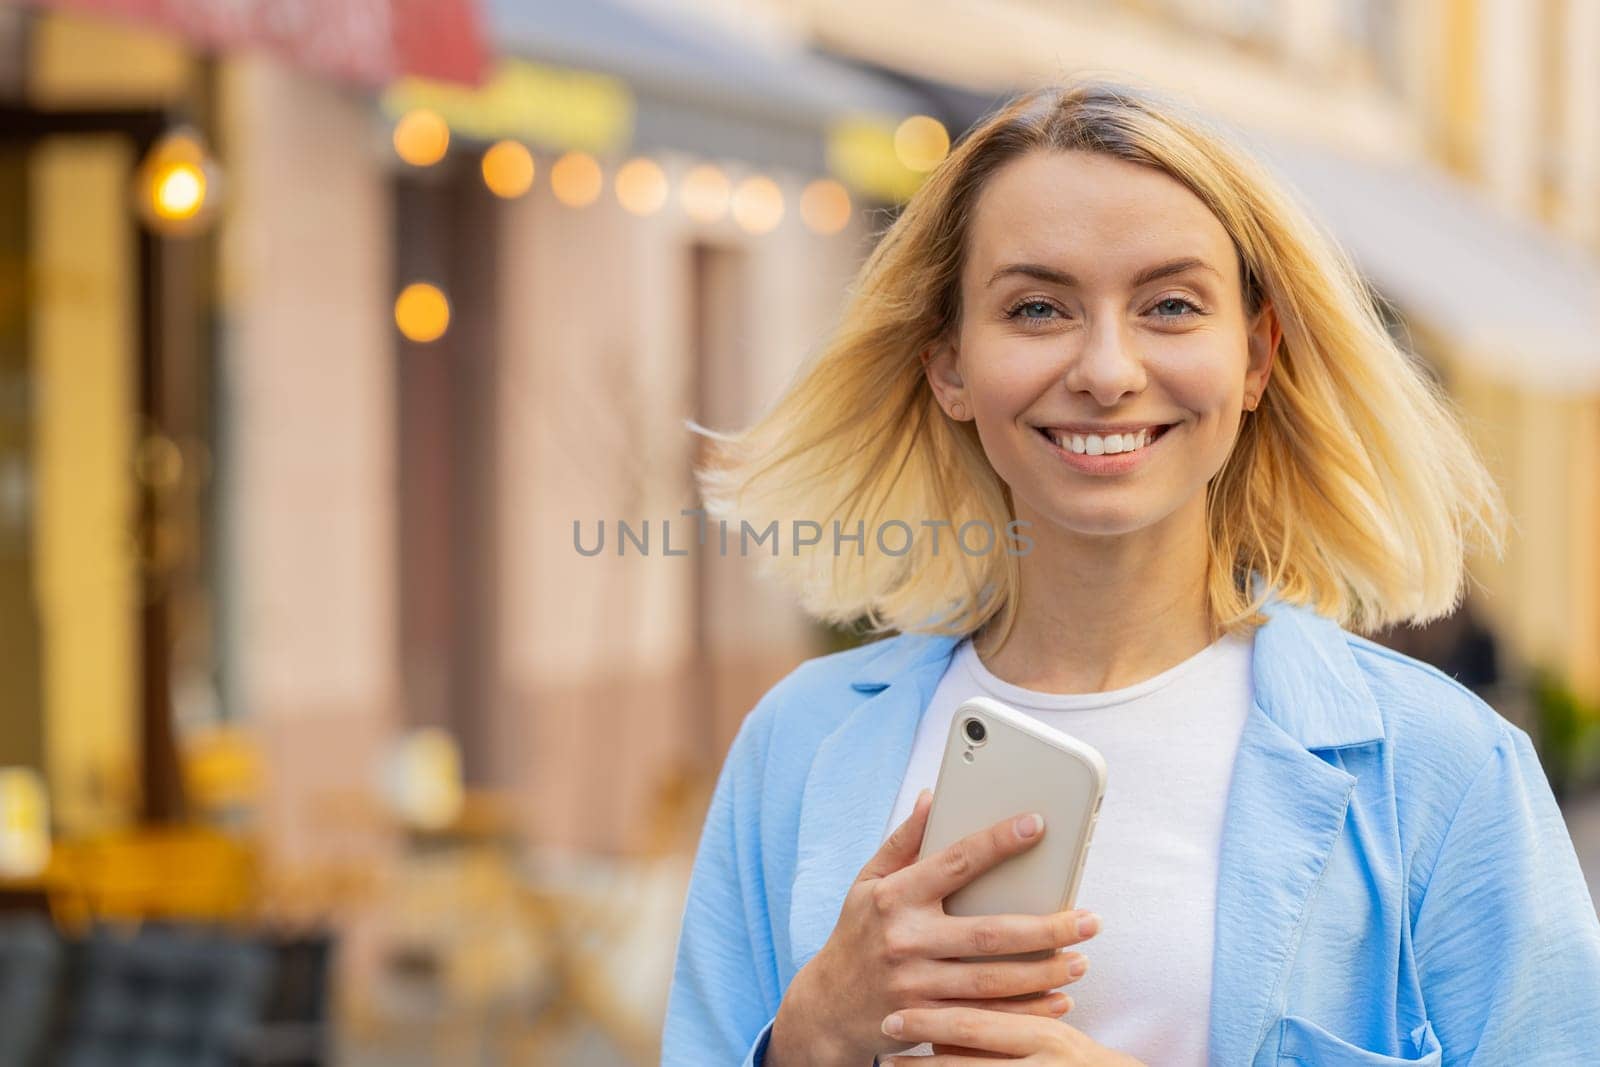 Smiling young woman using smartphone typing text messages browsing internet, finishing work, looking at camera outdoors. Lovely lady on urban city street. Camera zooming in and person becomes in focus